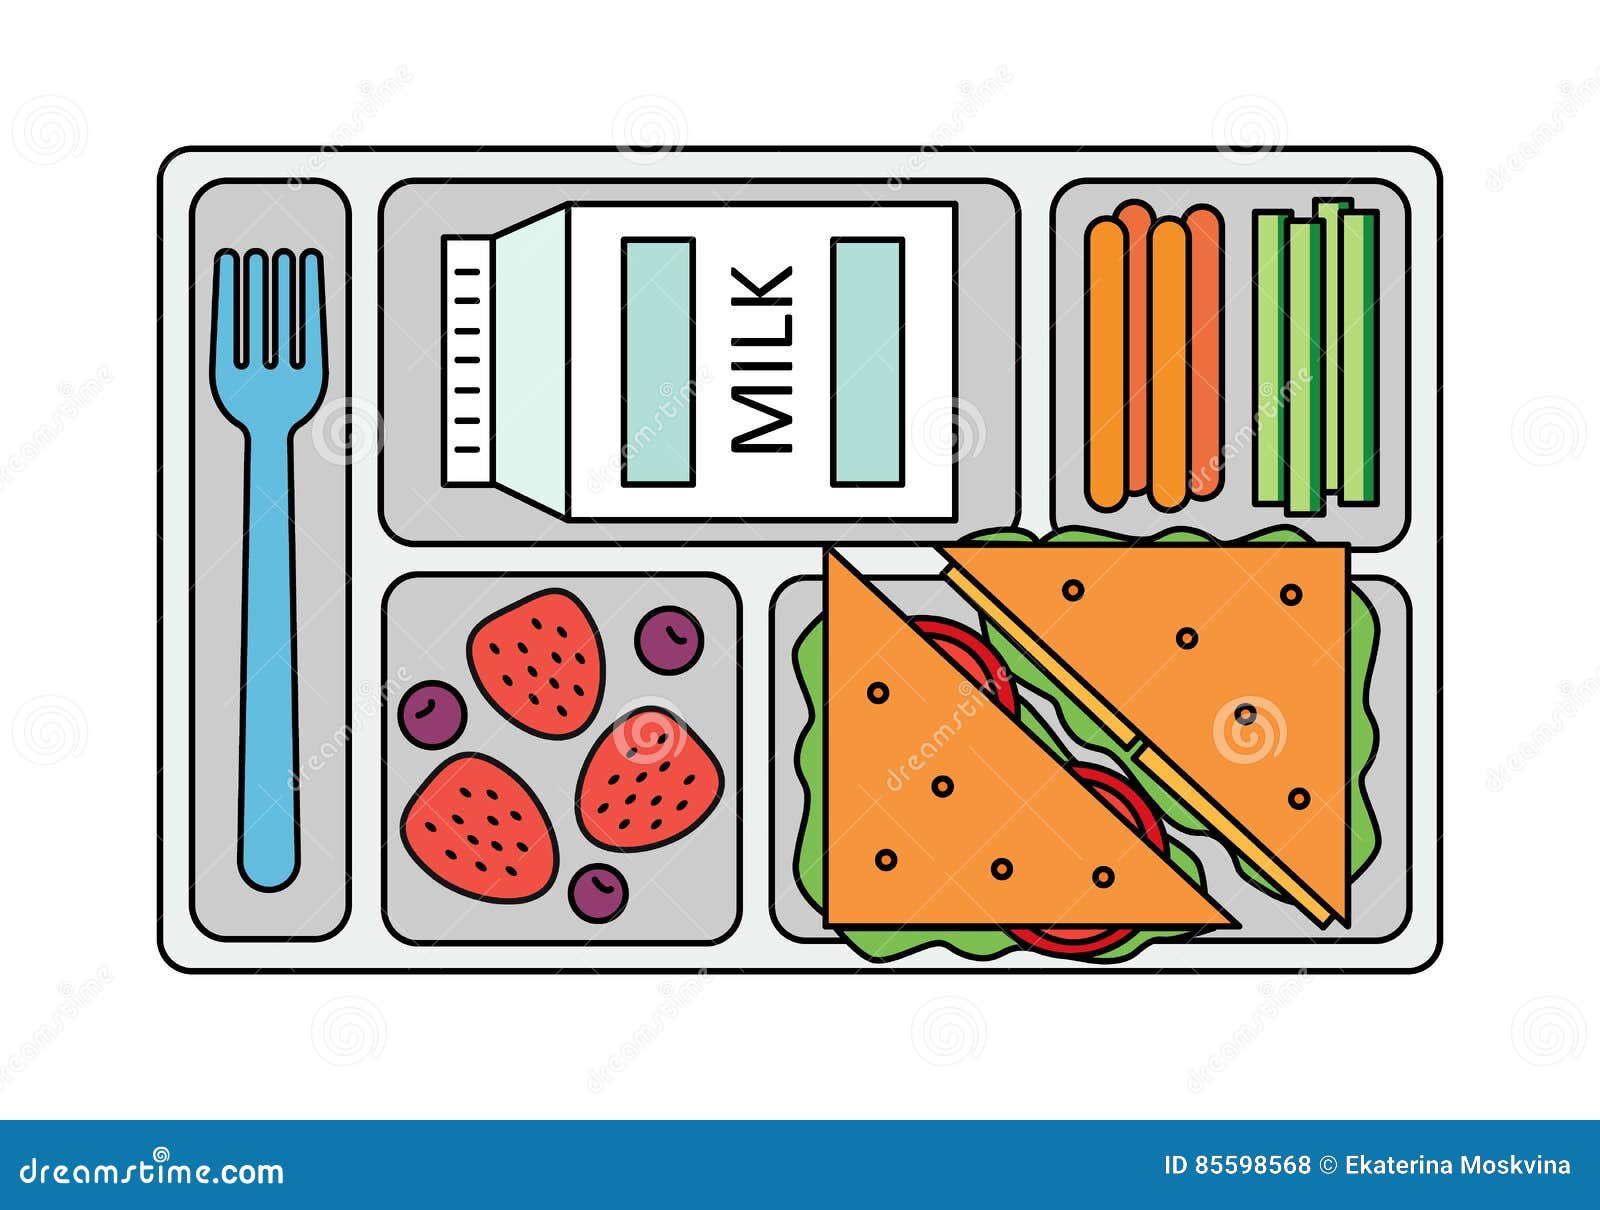 cafeteria line clipart images